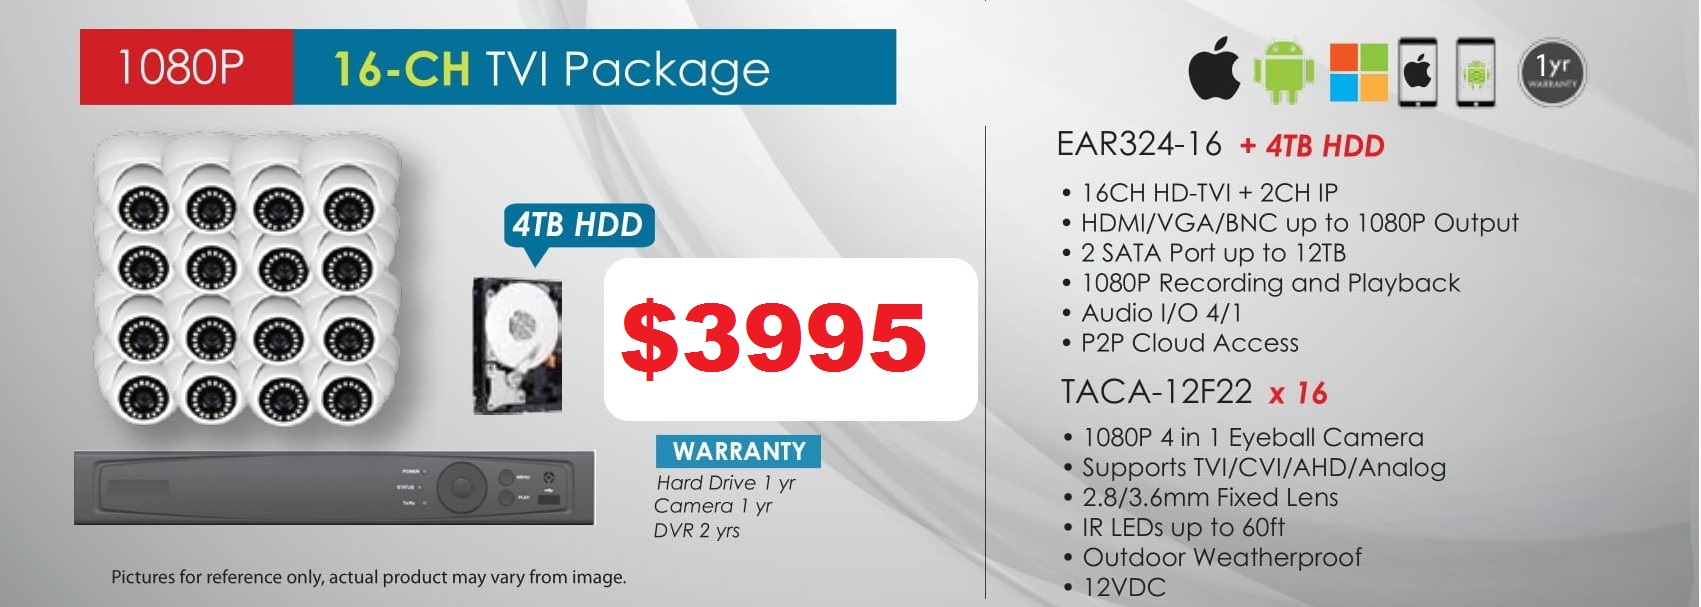 1080p-16ch-pack-2 New Promo Packages